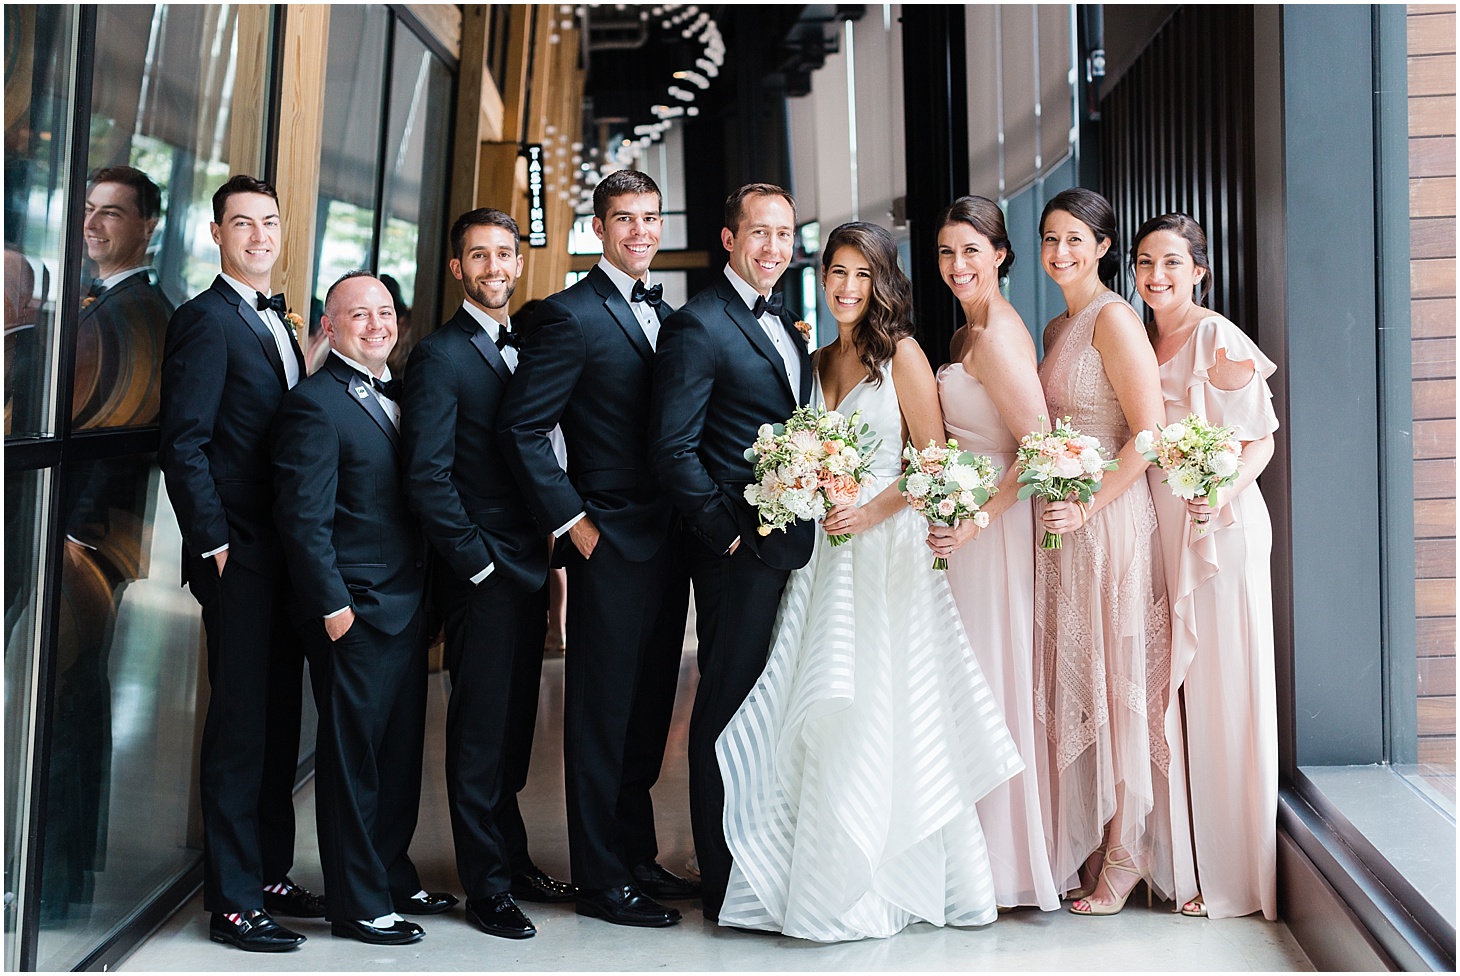 Bridal Party Portraits at District Winery | Chic and Modern Interfaith Wedding in Washington, DC | Sarah Bradshaw Photography